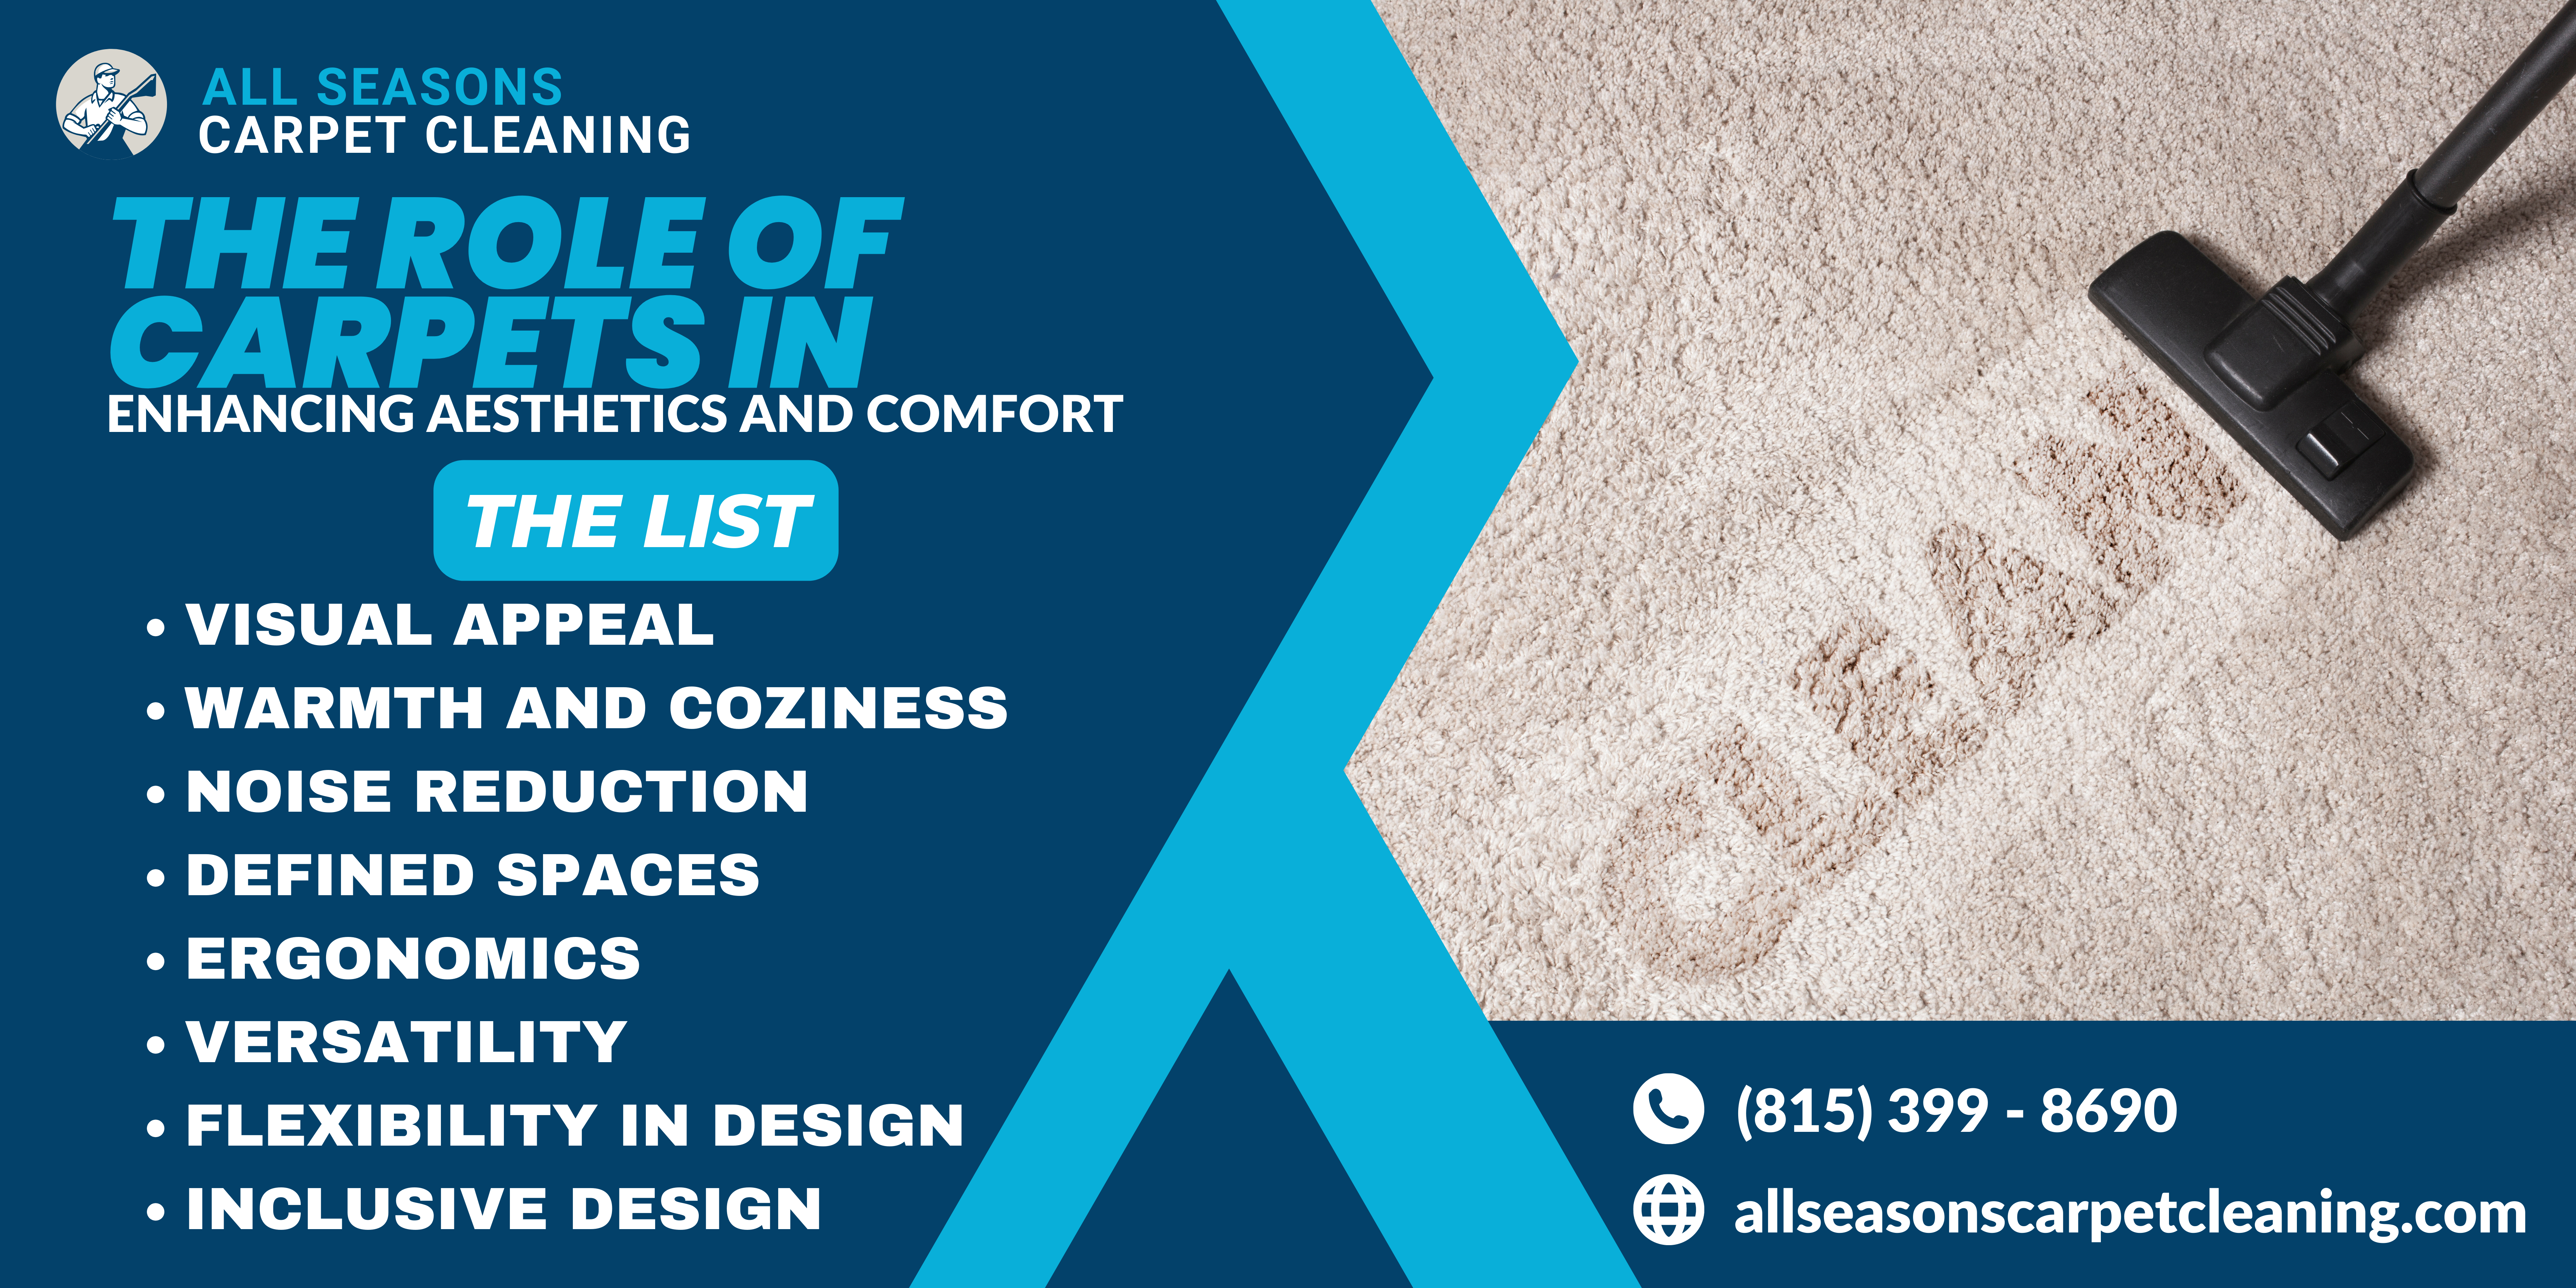 benefits of hiring professional commercial carpet cleaning services